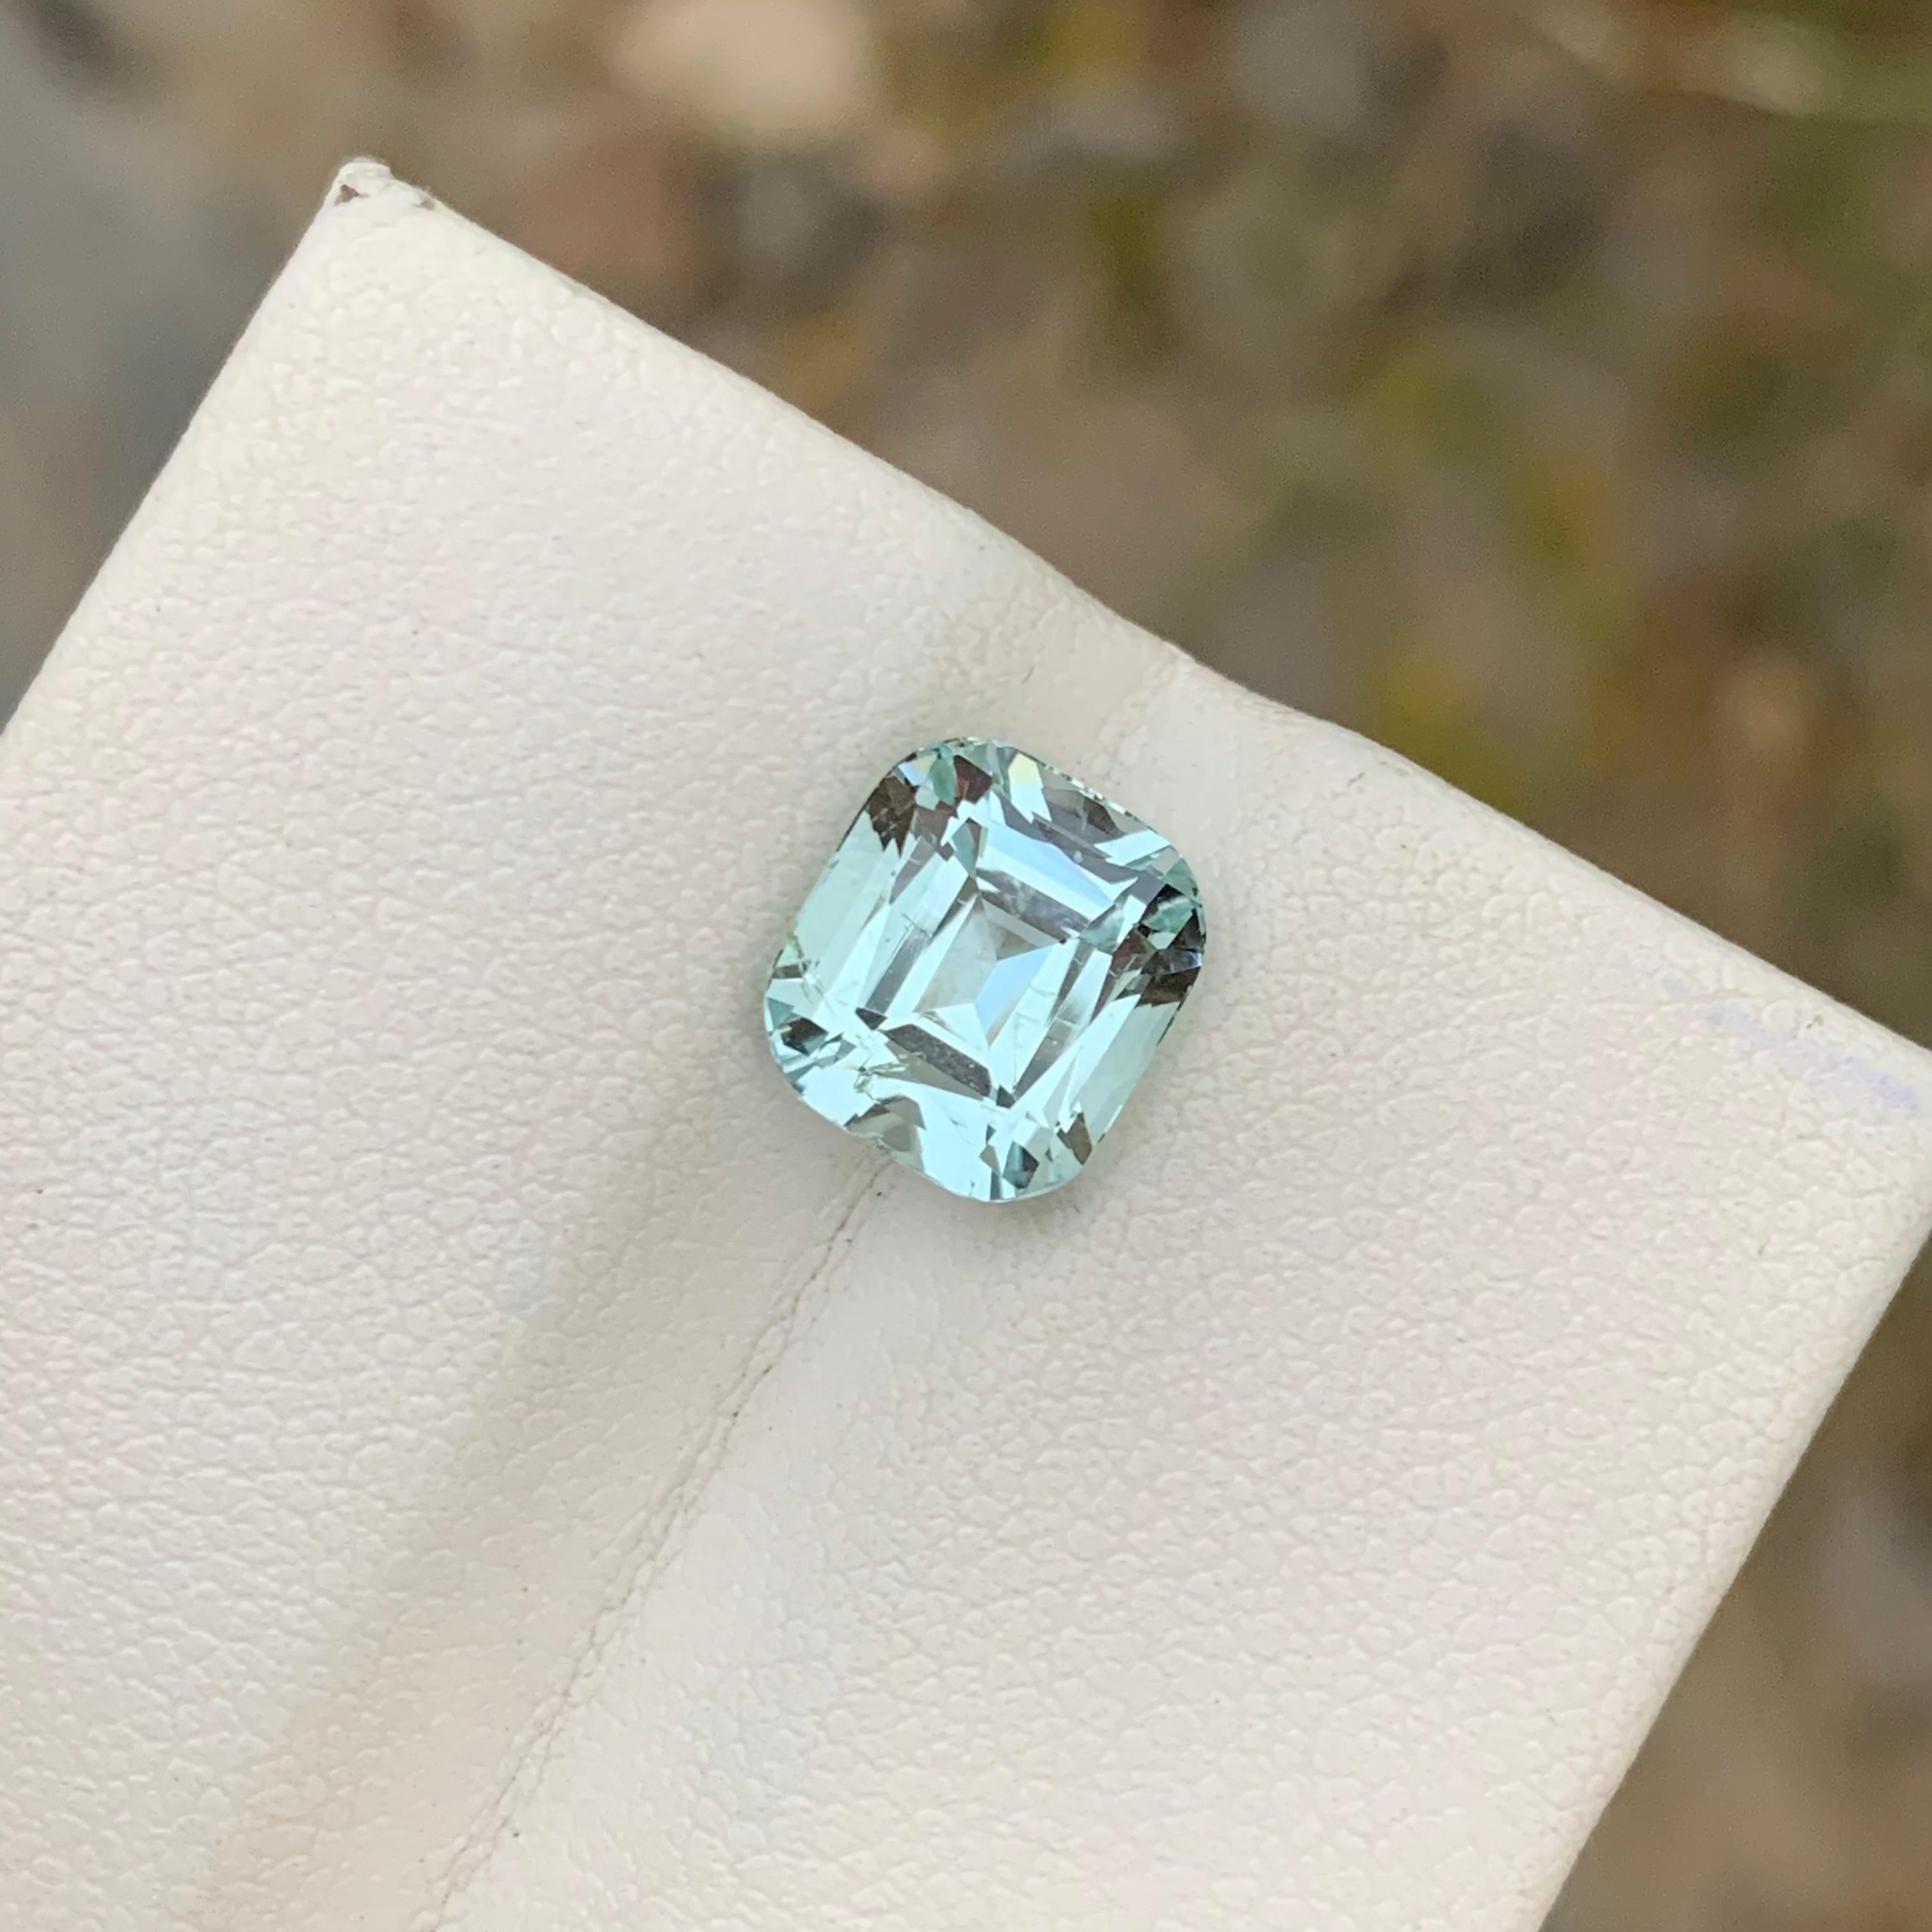 Aesthetic Movement 3.55 Carats Natural Loose Aquamarine Ring Gem From Shigar Valley Mine For Sale